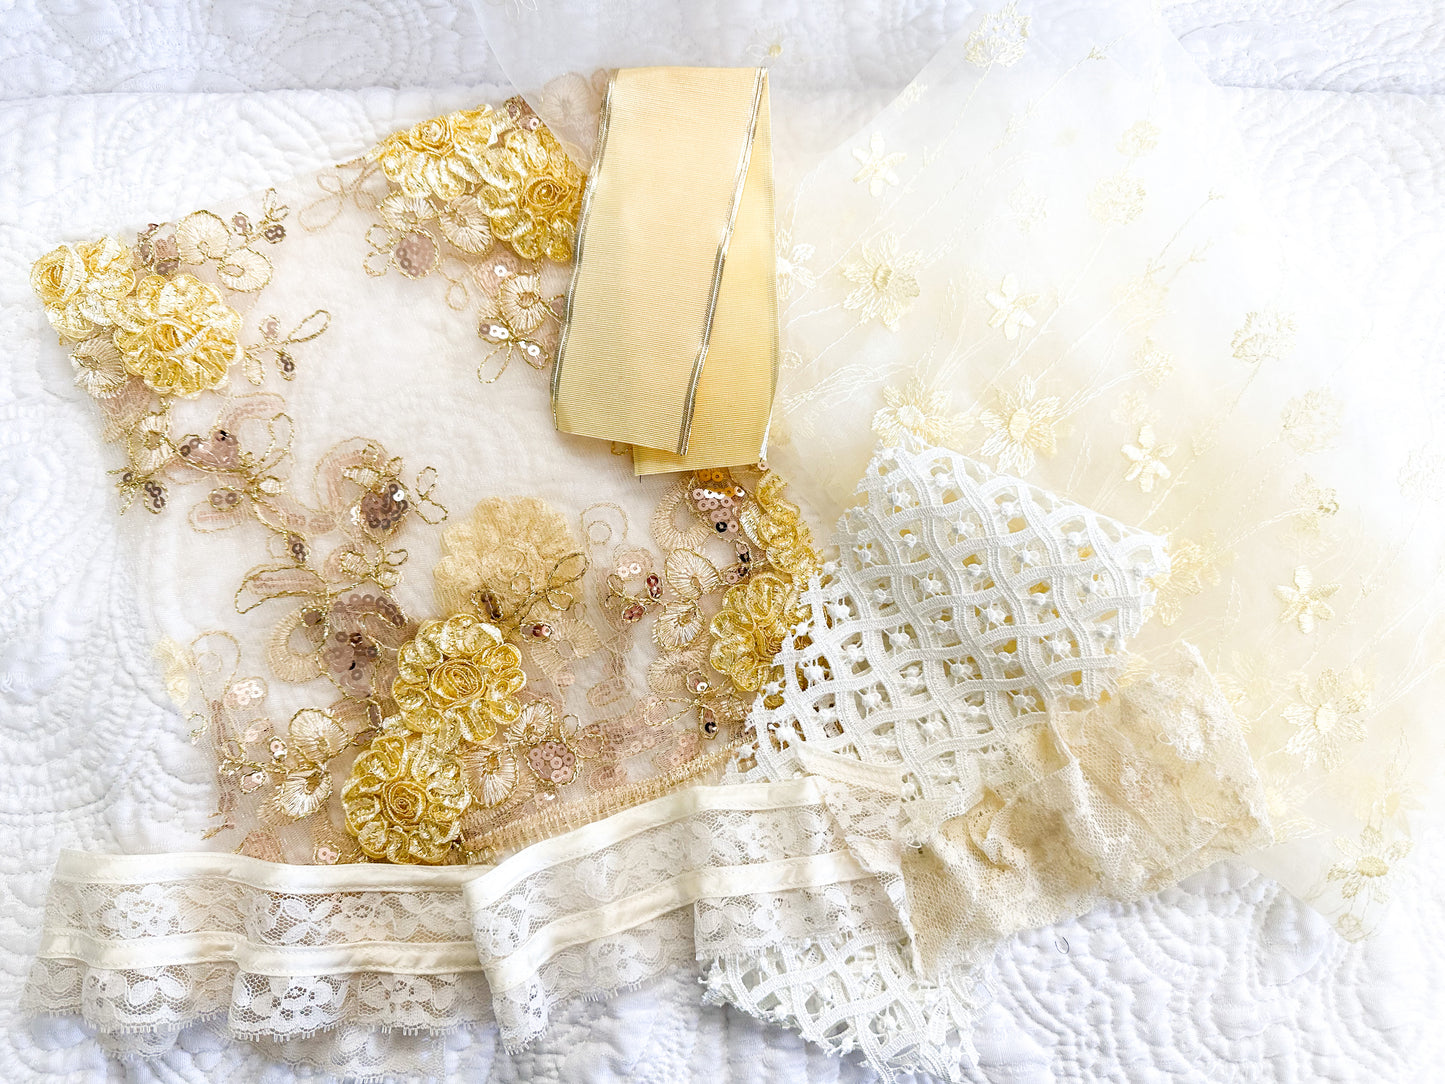 Coordinated Lace, Ribbon and Fabric